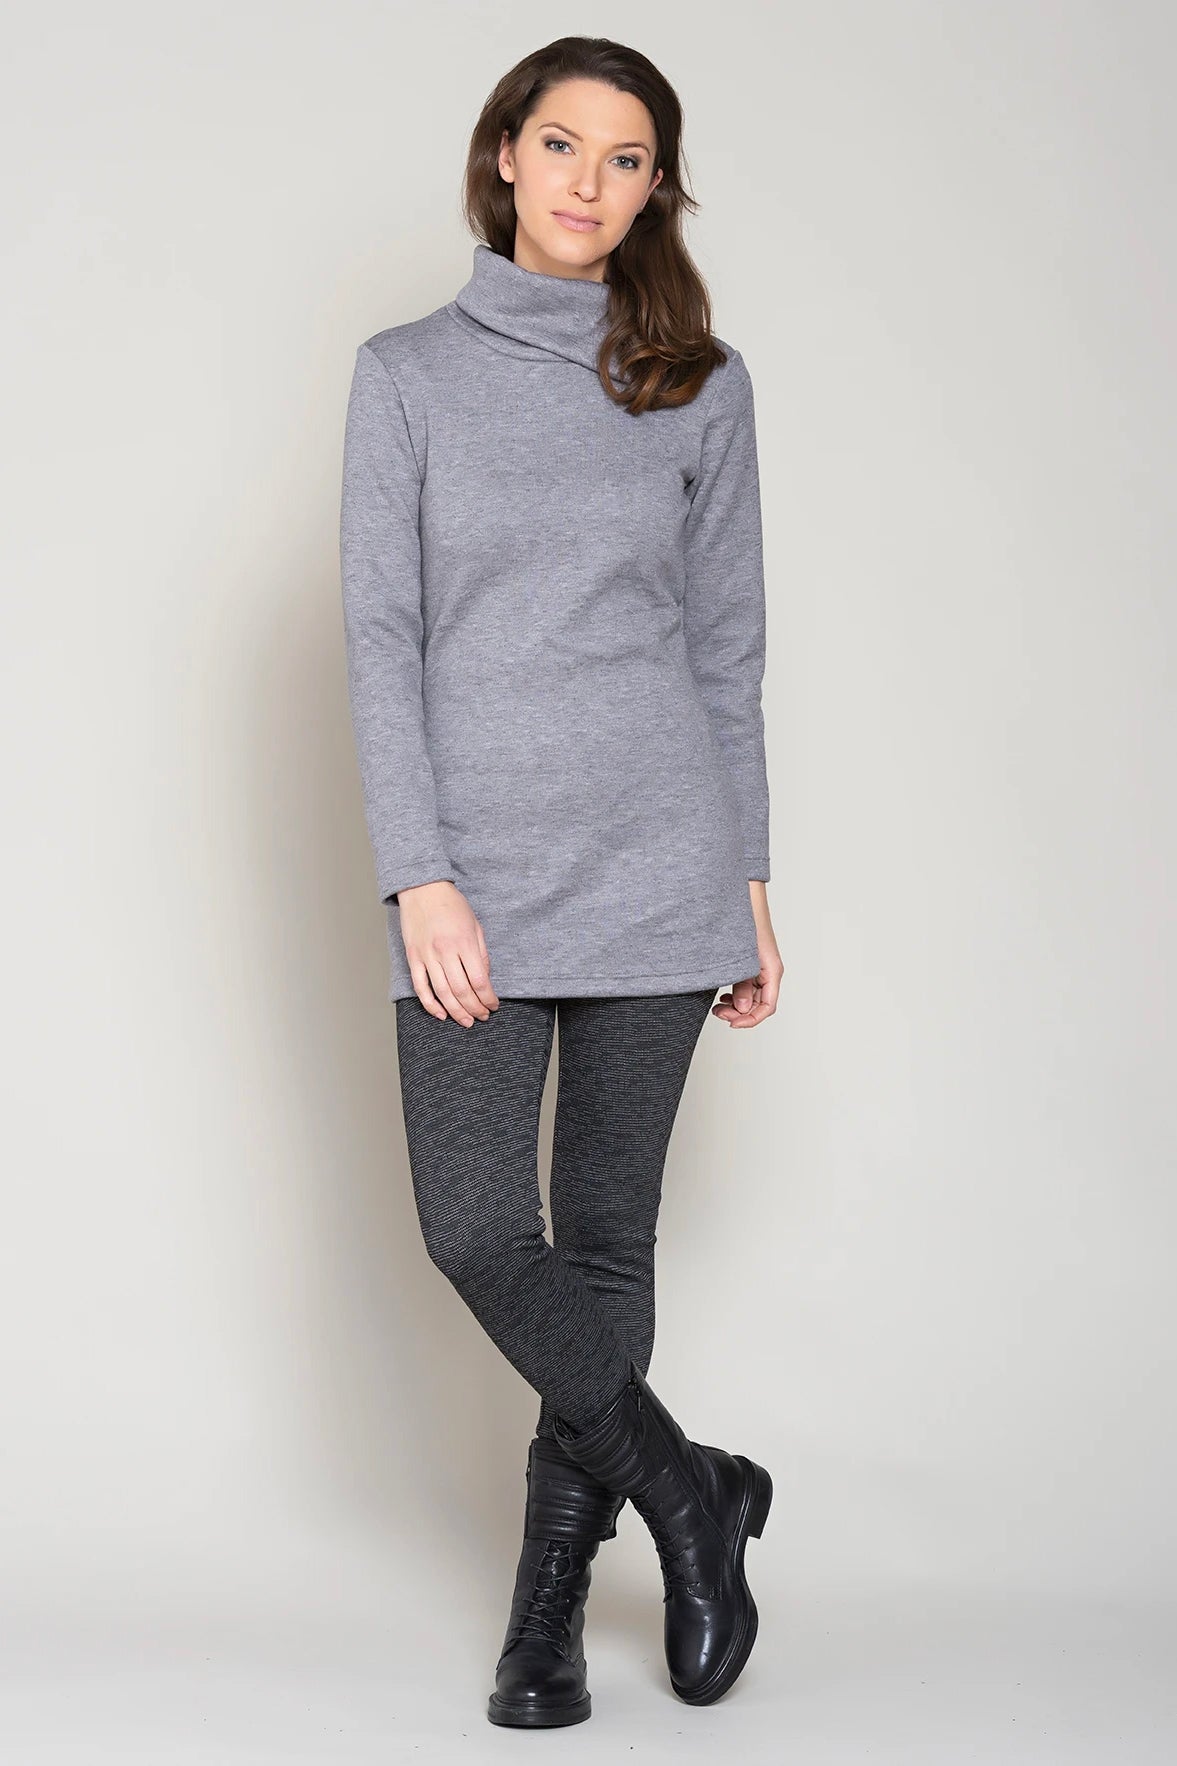 Ruelle, Triangle Tunic, Soft Grey, Front View.